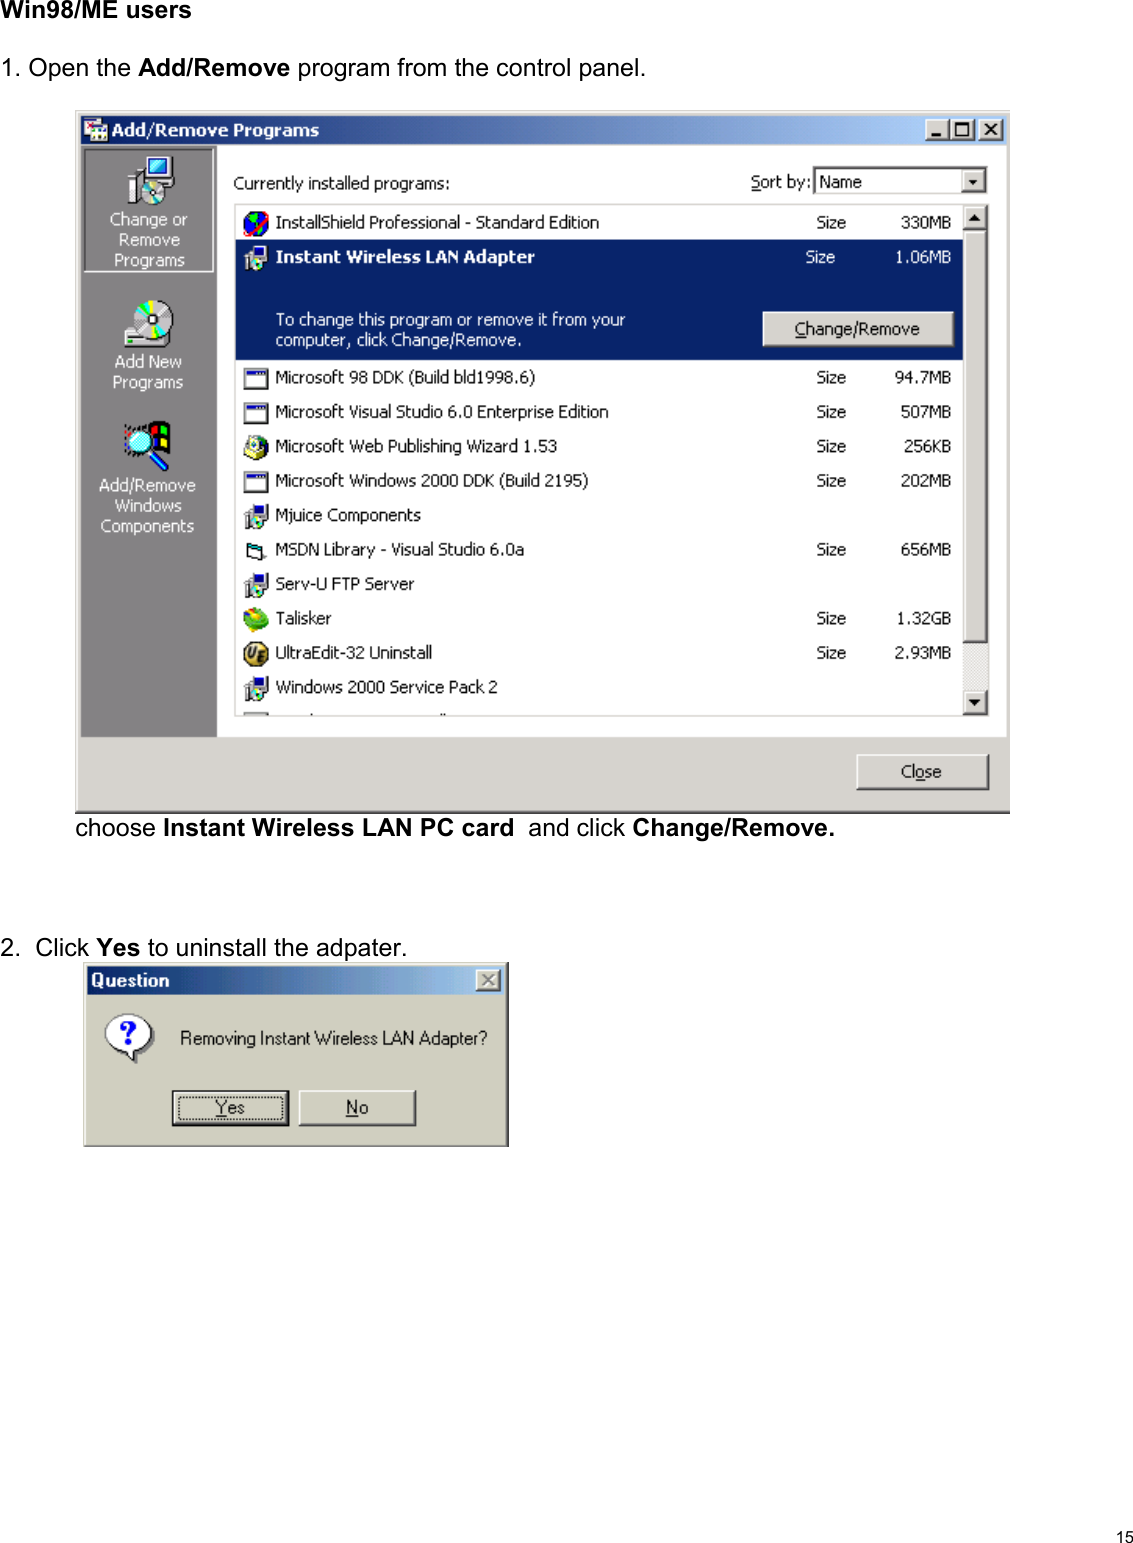                                                                                                                                                                                           15   Win98/ME users  1. Open the Add/Remove program from the control panel.         choose Instant Wireless LAN PC card  and click Change/Remove.       2.  Click Yes to uninstall the adpater.                      